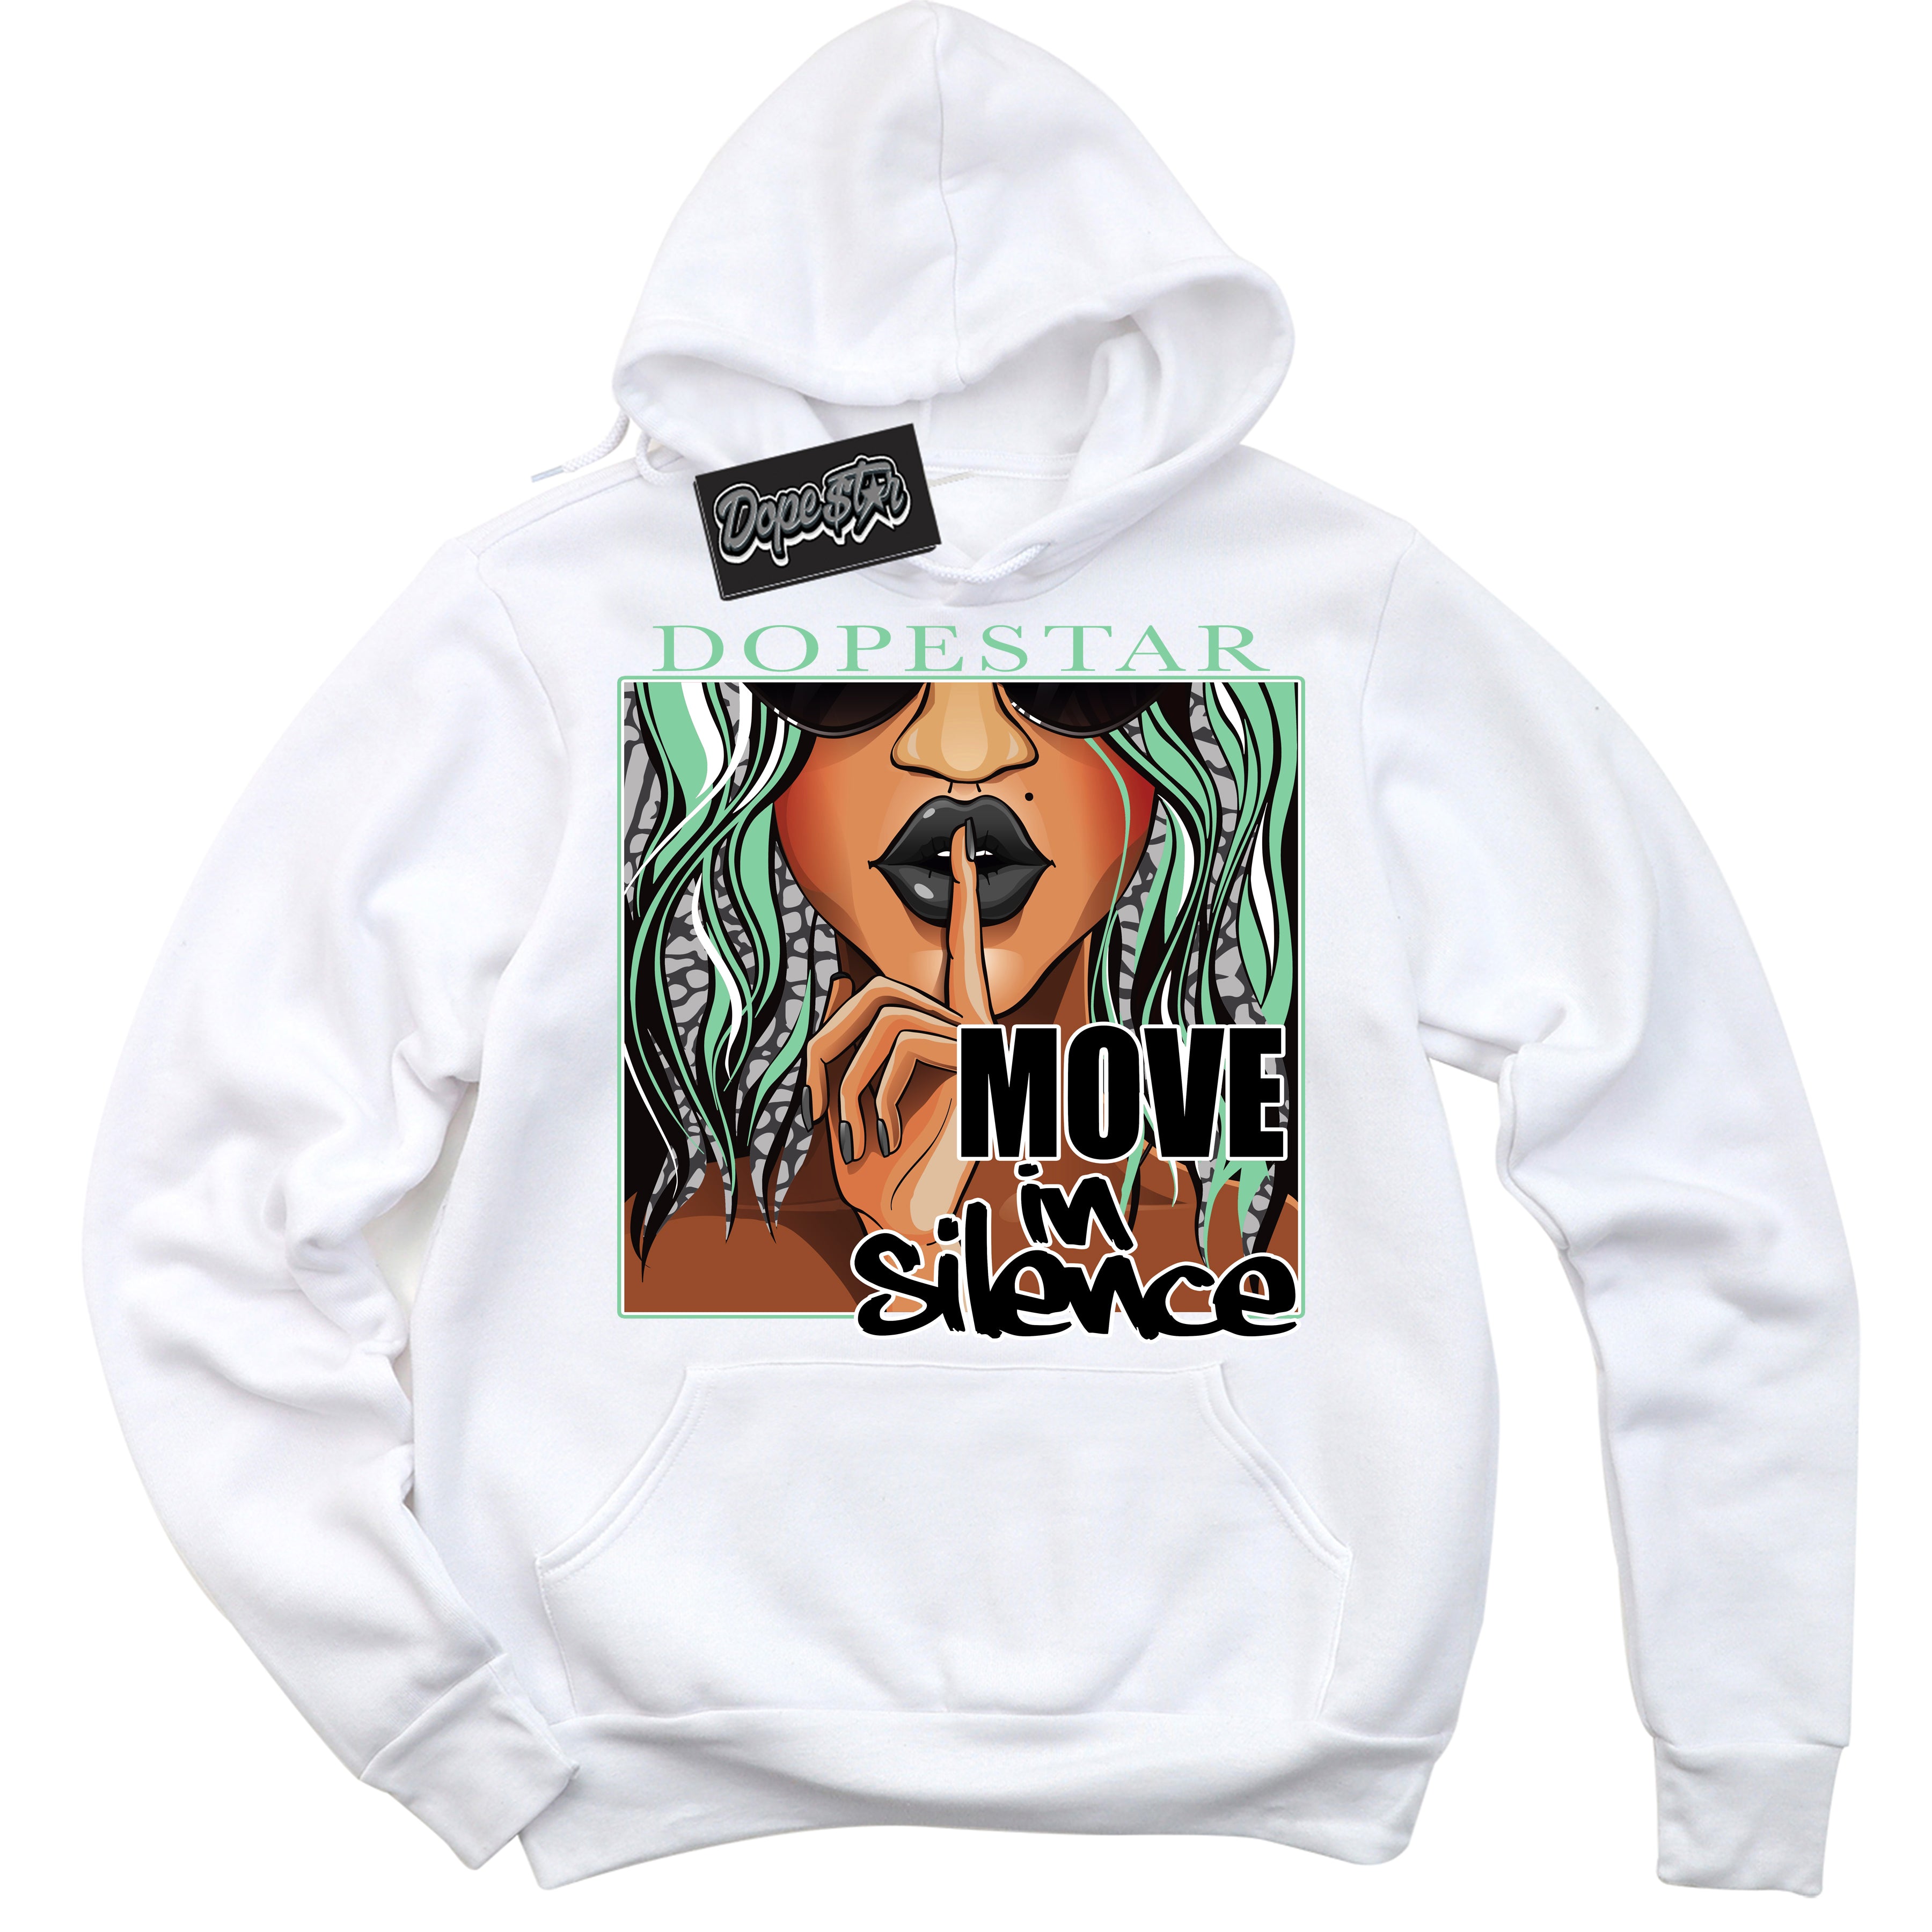 Cool White Graphic DopeStar Hoodie with “ Move In Silence “ print, that perfectly matches Green Glow 3s sneakers